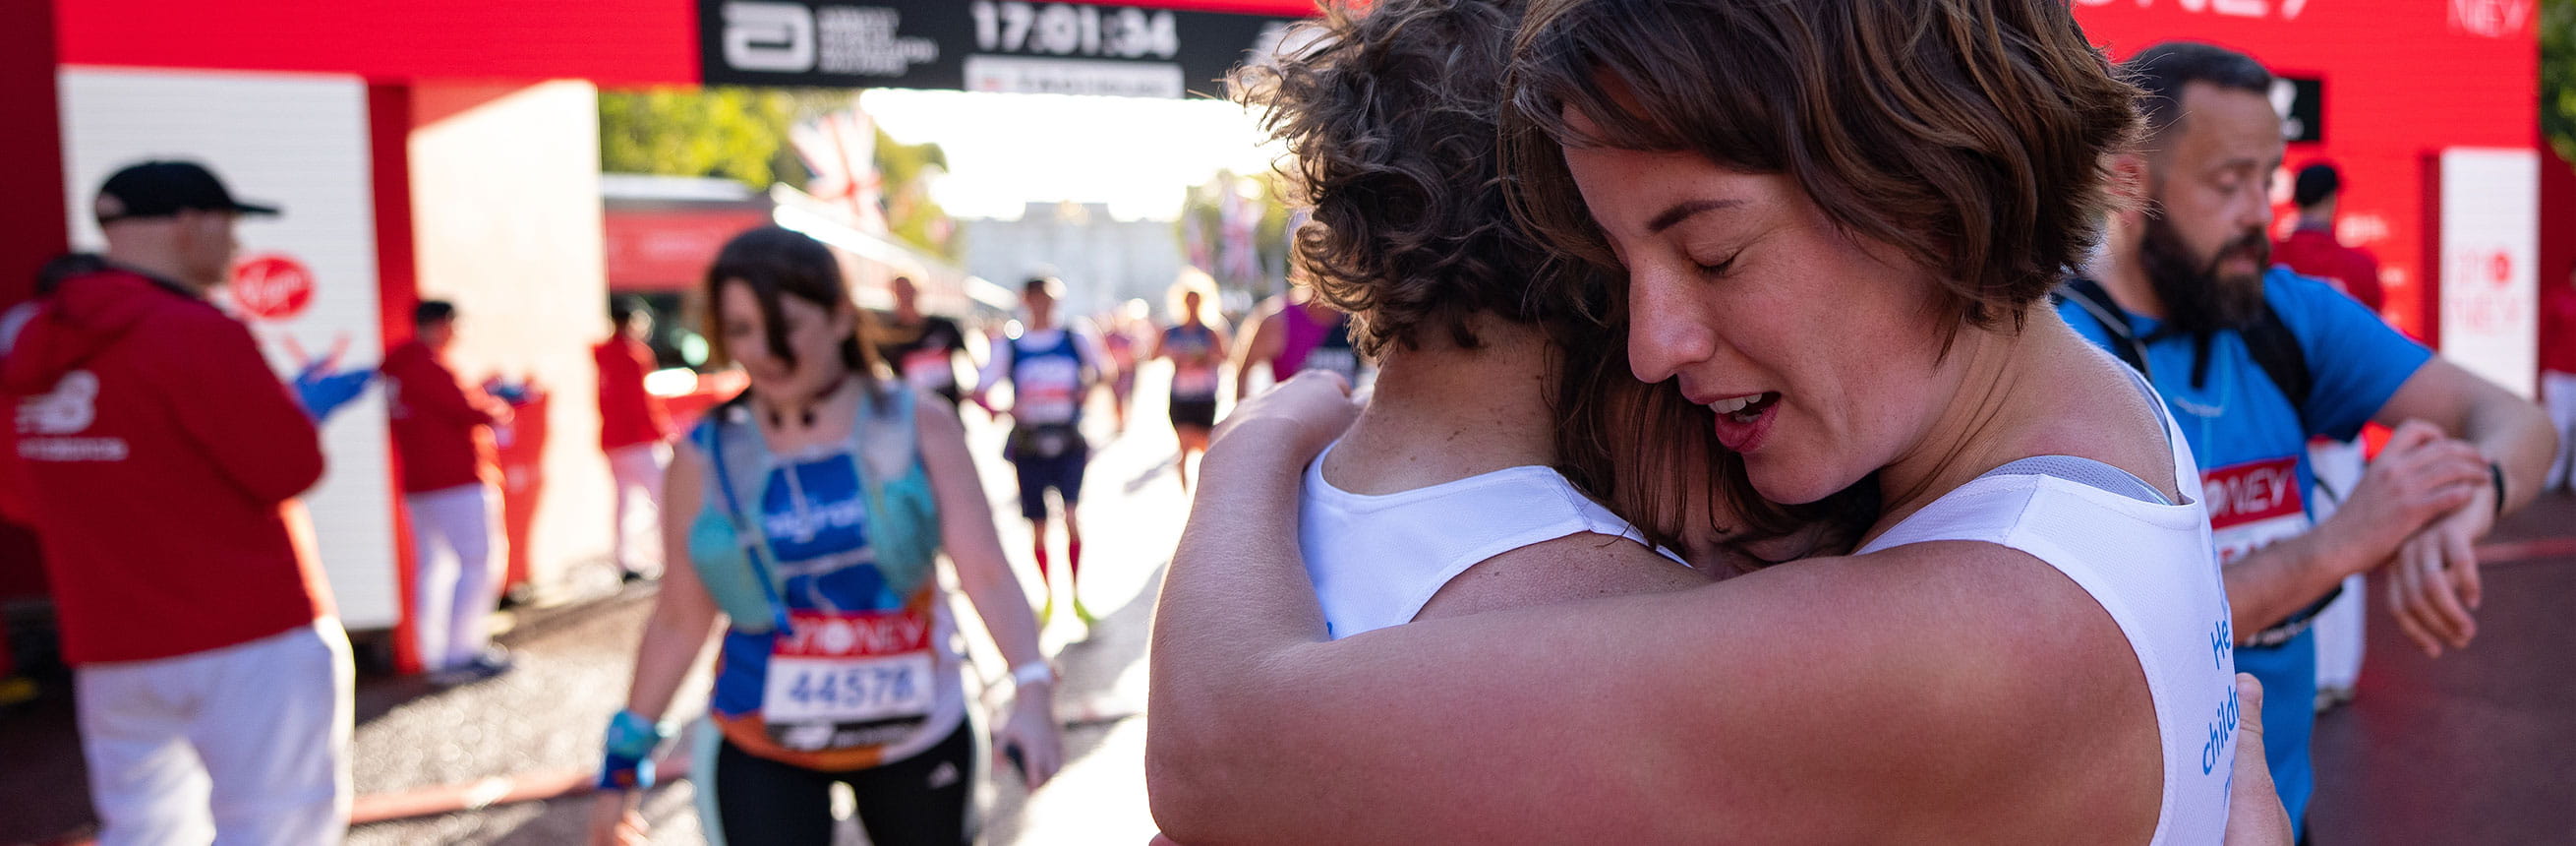 Mass runners hug at the finish line after completing The 2021 Virgin Money London Marathon